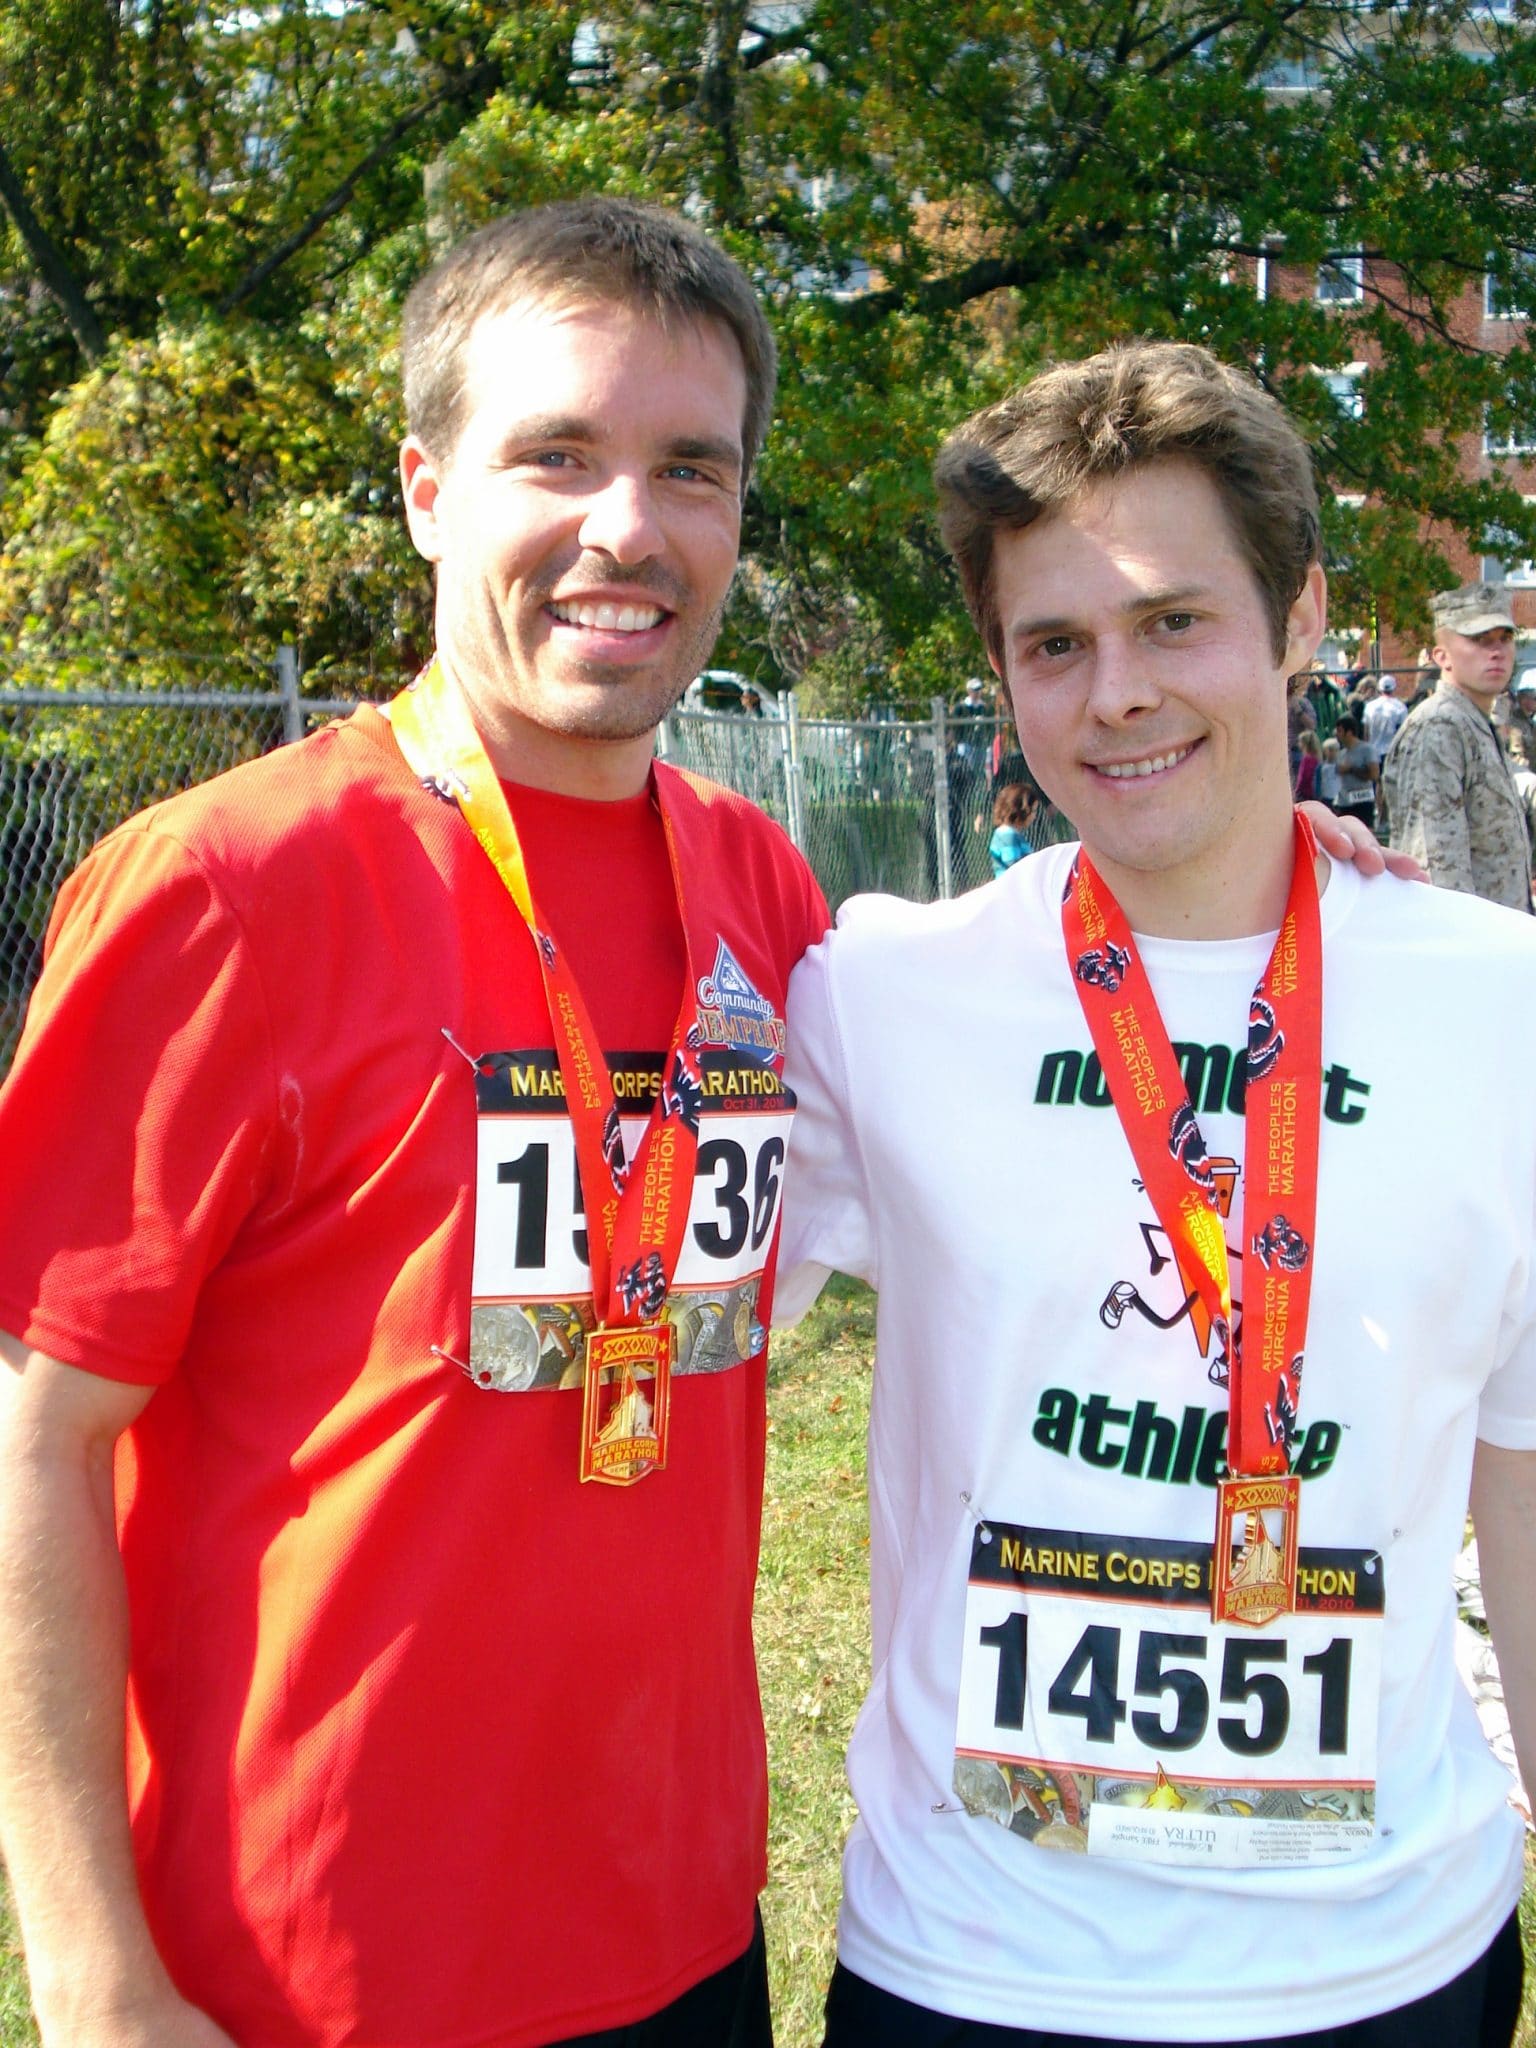 Matt and brother in law wearing finishers medal at Marine Corps Marathon 2010